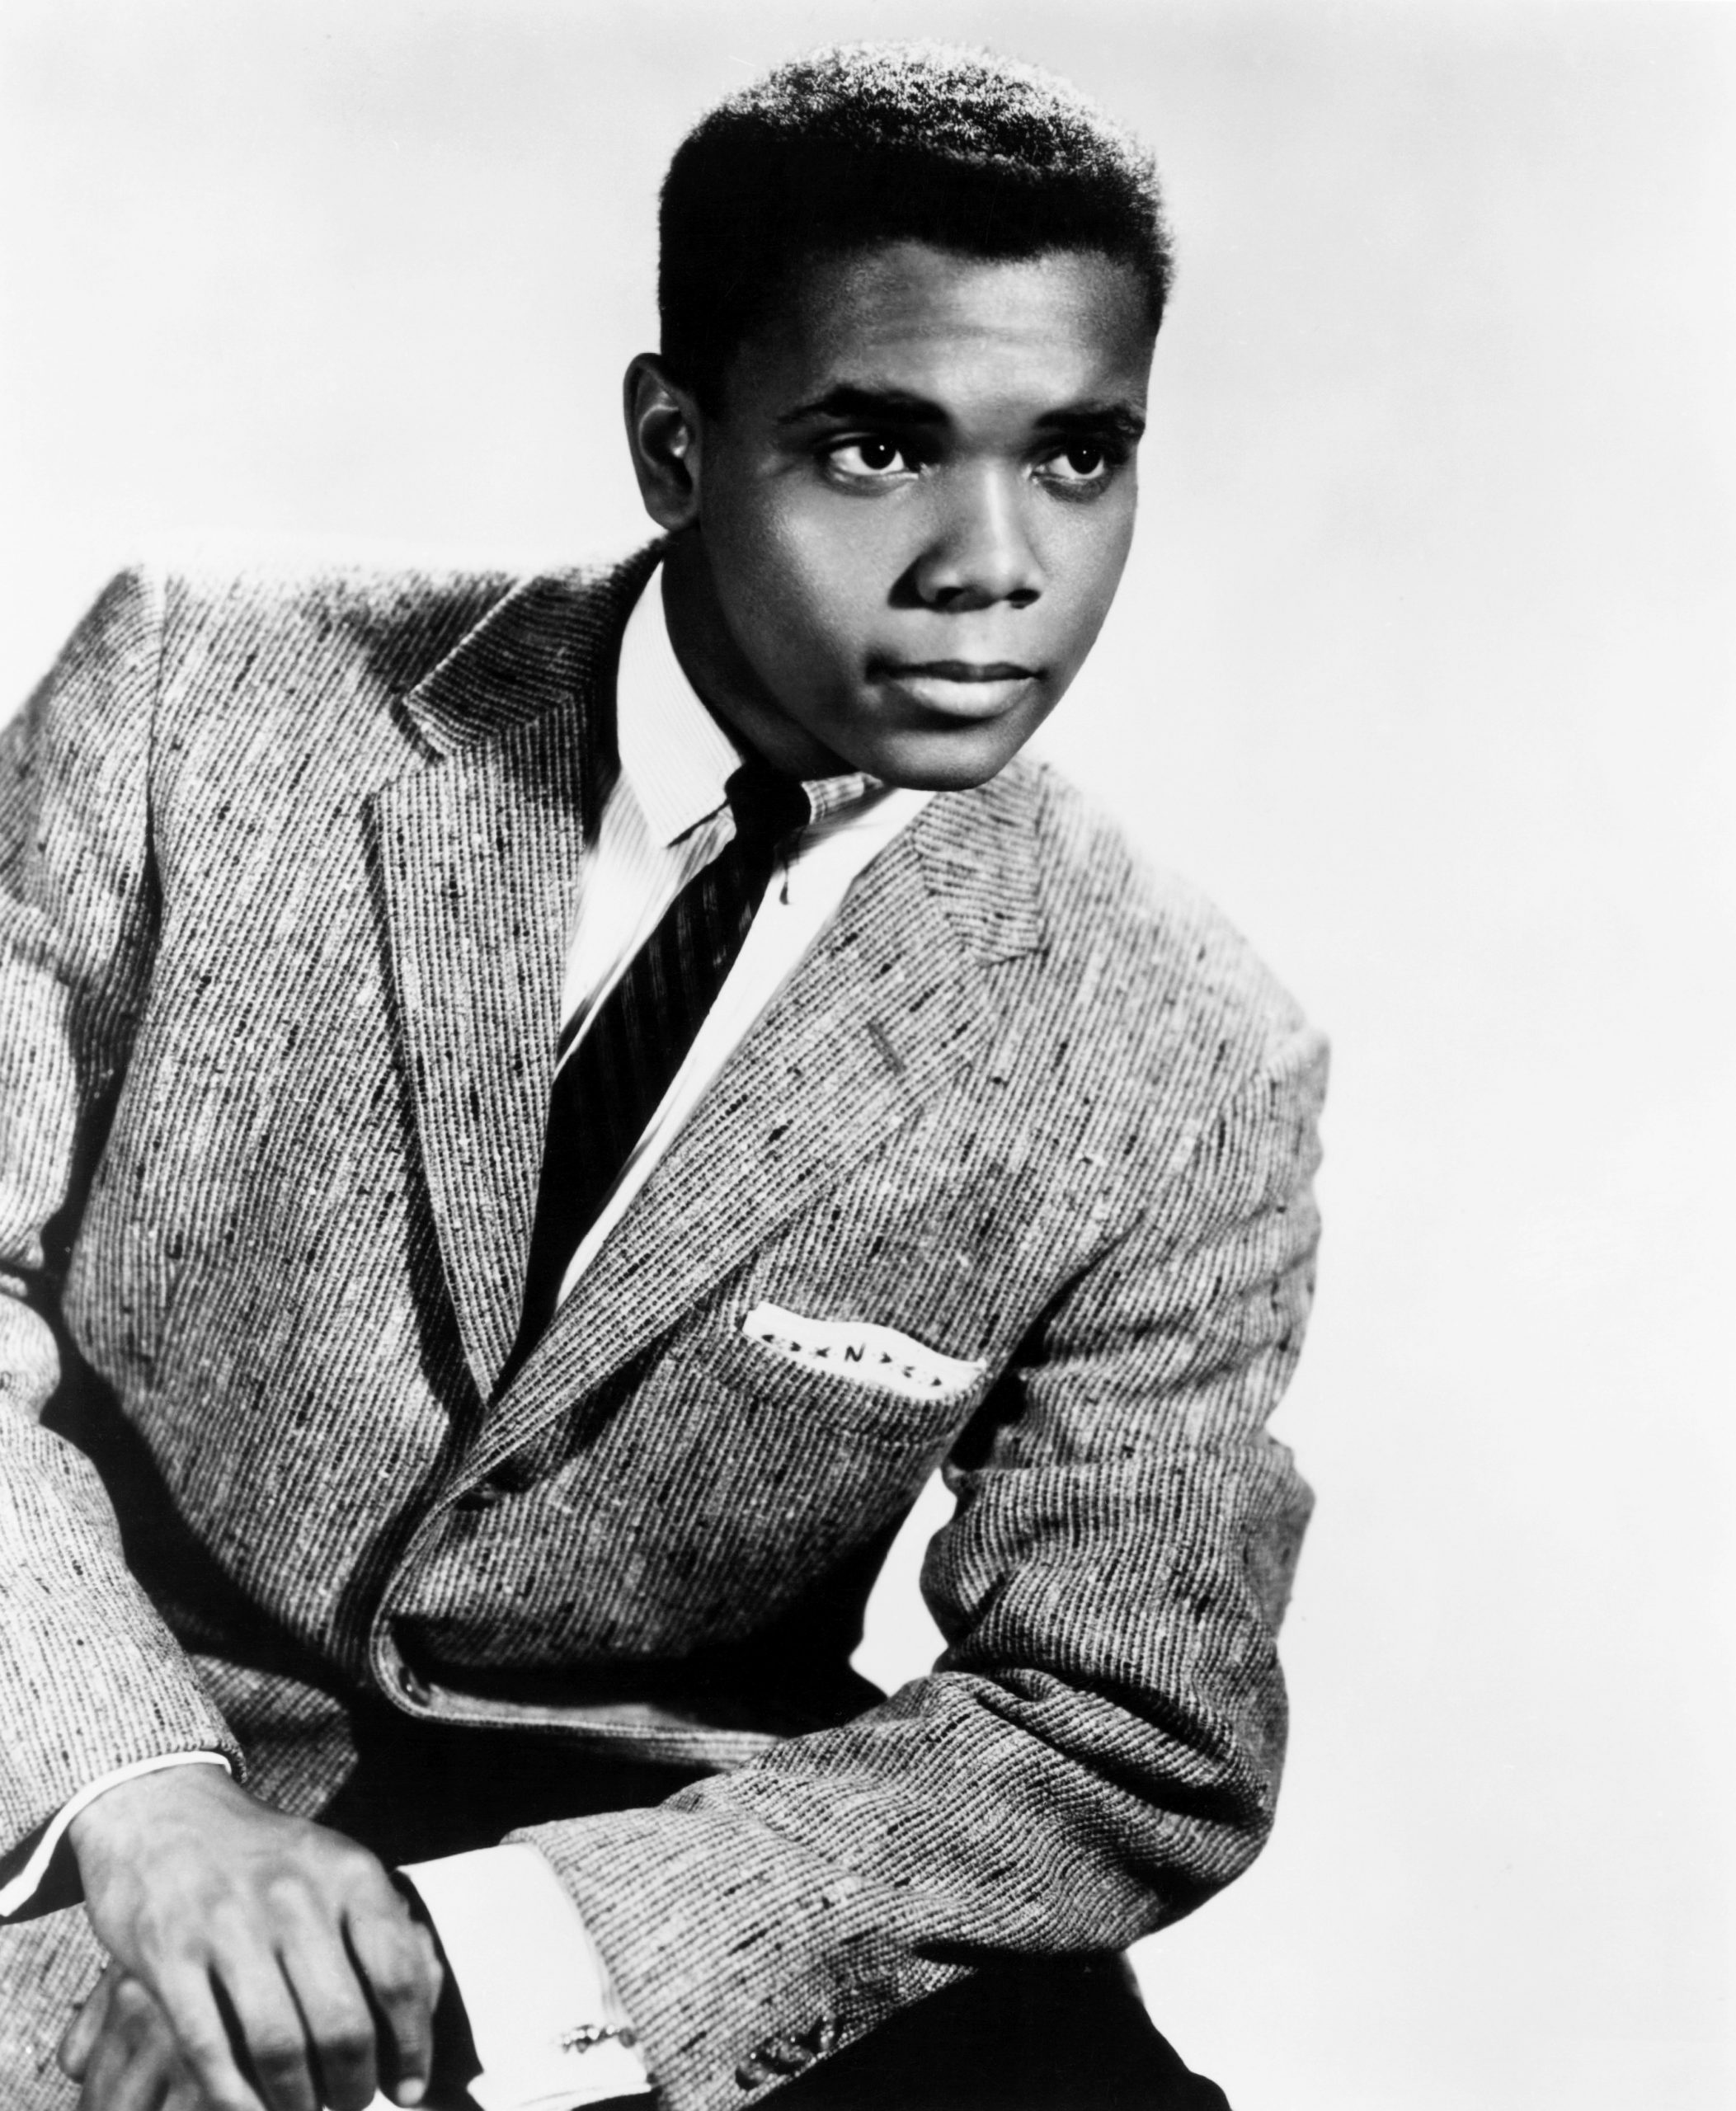 Rest in peace, Johnny Nash